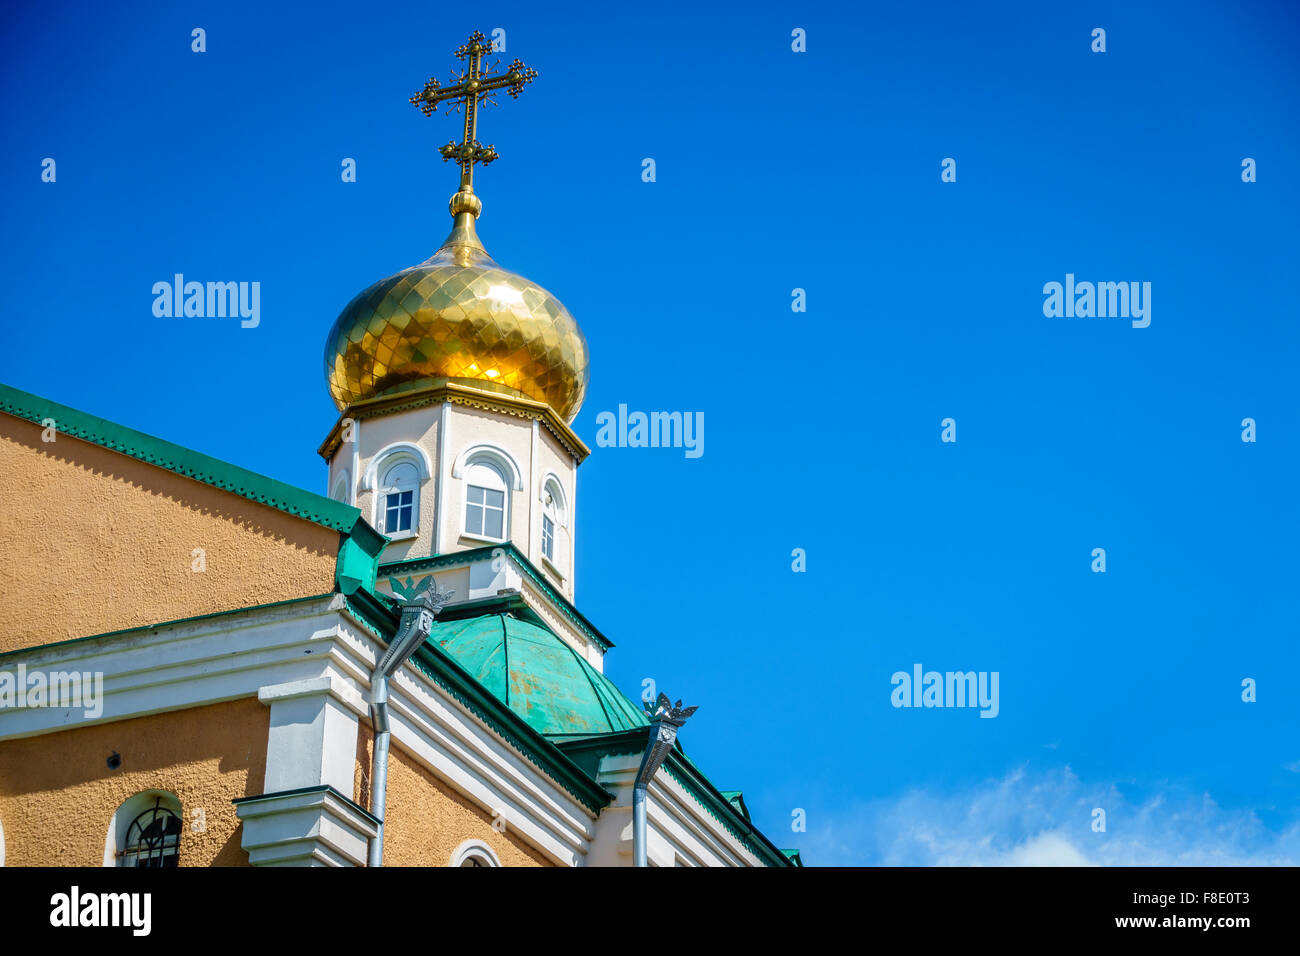 Classic gold-plated onion dome of a Russian Orthodox church against blue sky Stock Photo